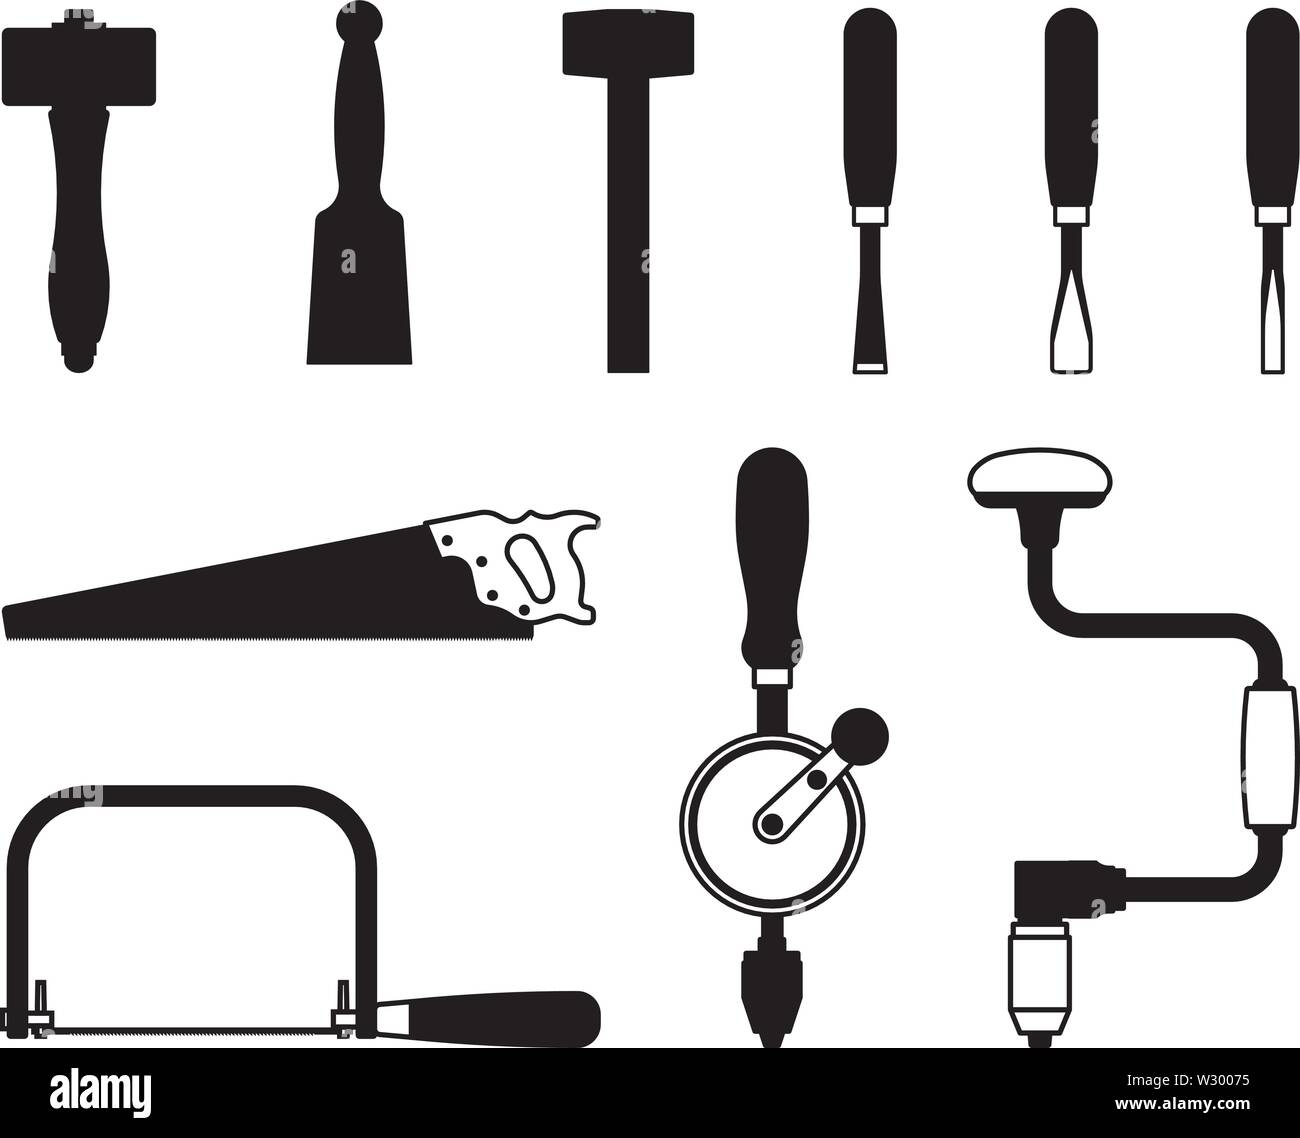 Woodworking hand tools. Silhouette icons. Vector illustration Stock Vector